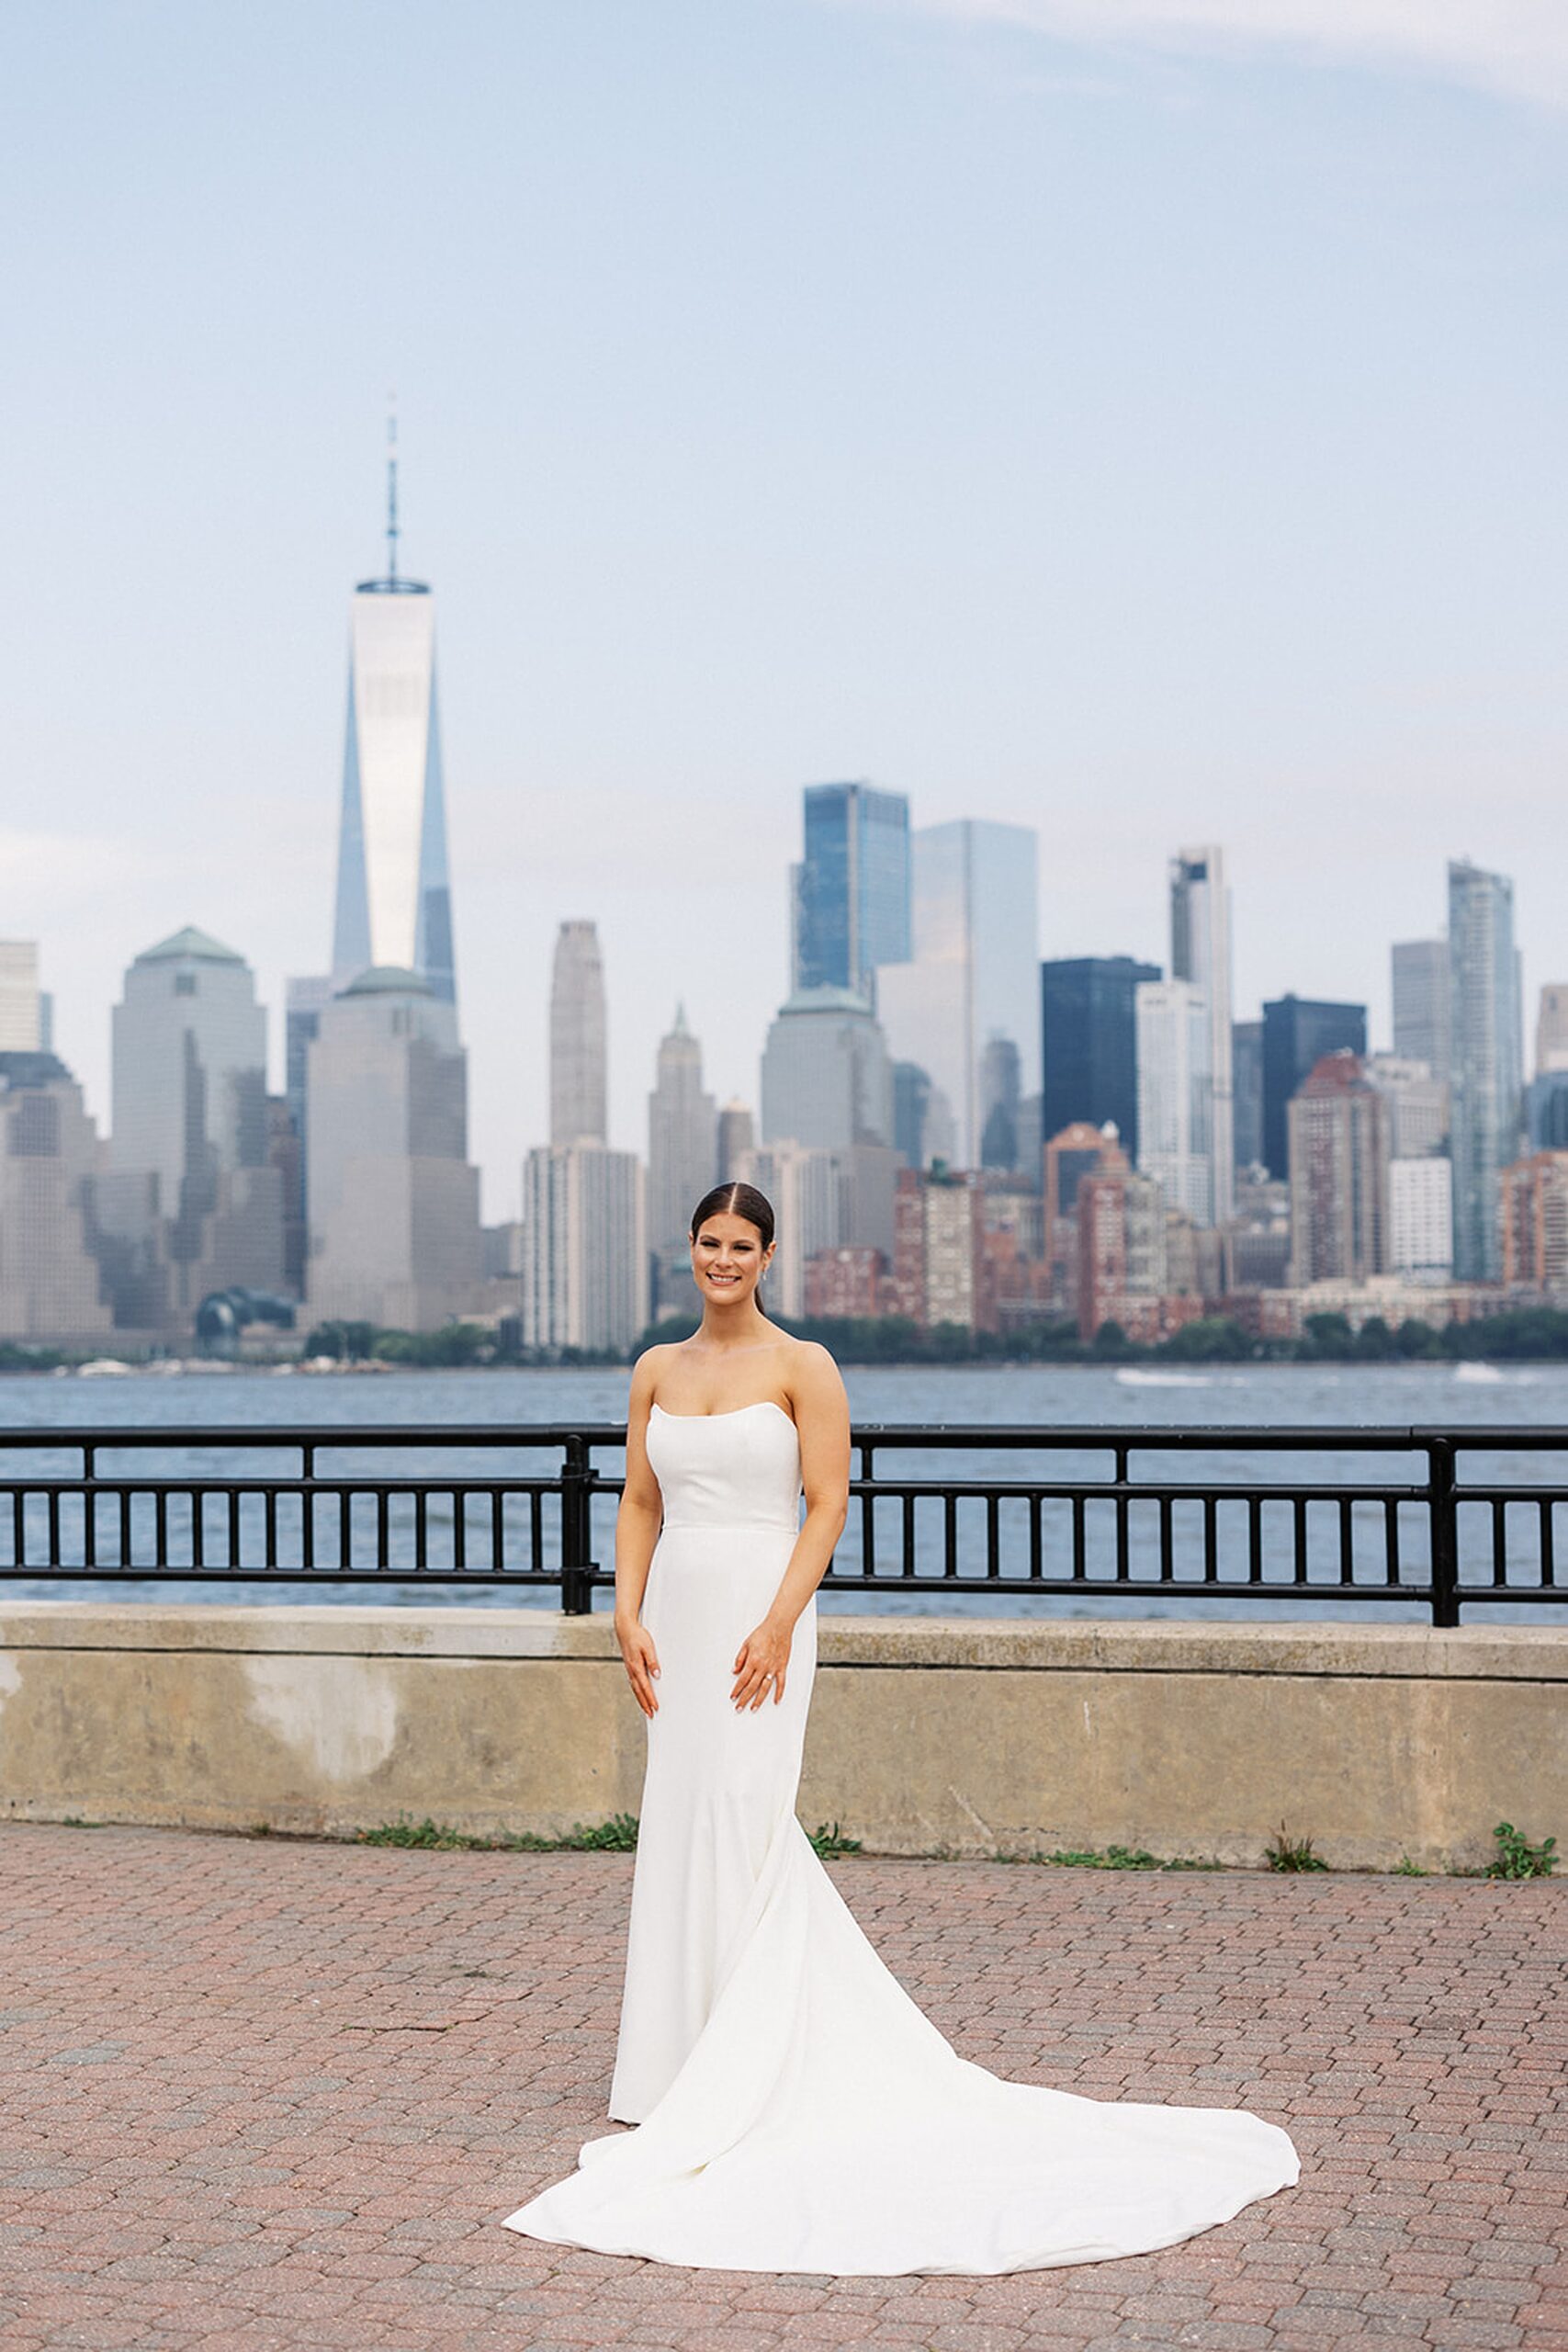 A bride stands in a brick paved riverfront park with Manhattan behind her